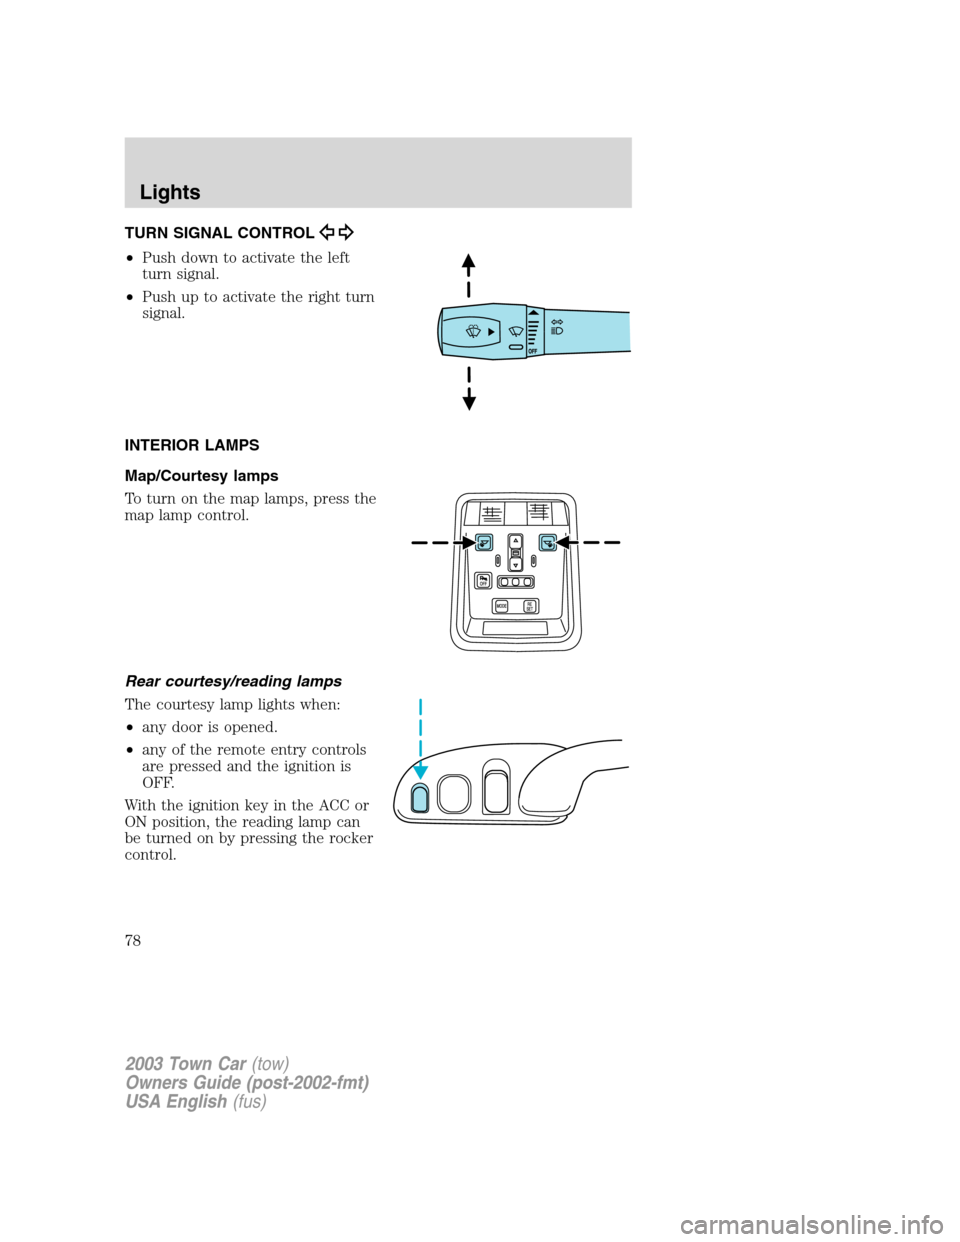 LINCOLN TOWN CAR 2003  Owners Manual TURN SIGNAL CONTROL
•Push down to activate the left
turn signal.
•Push up to activate the right turn
signal.
INTERIOR LAMPS
Map/Courtesy lamps
To turn on the map lamps, press the
map lamp control.